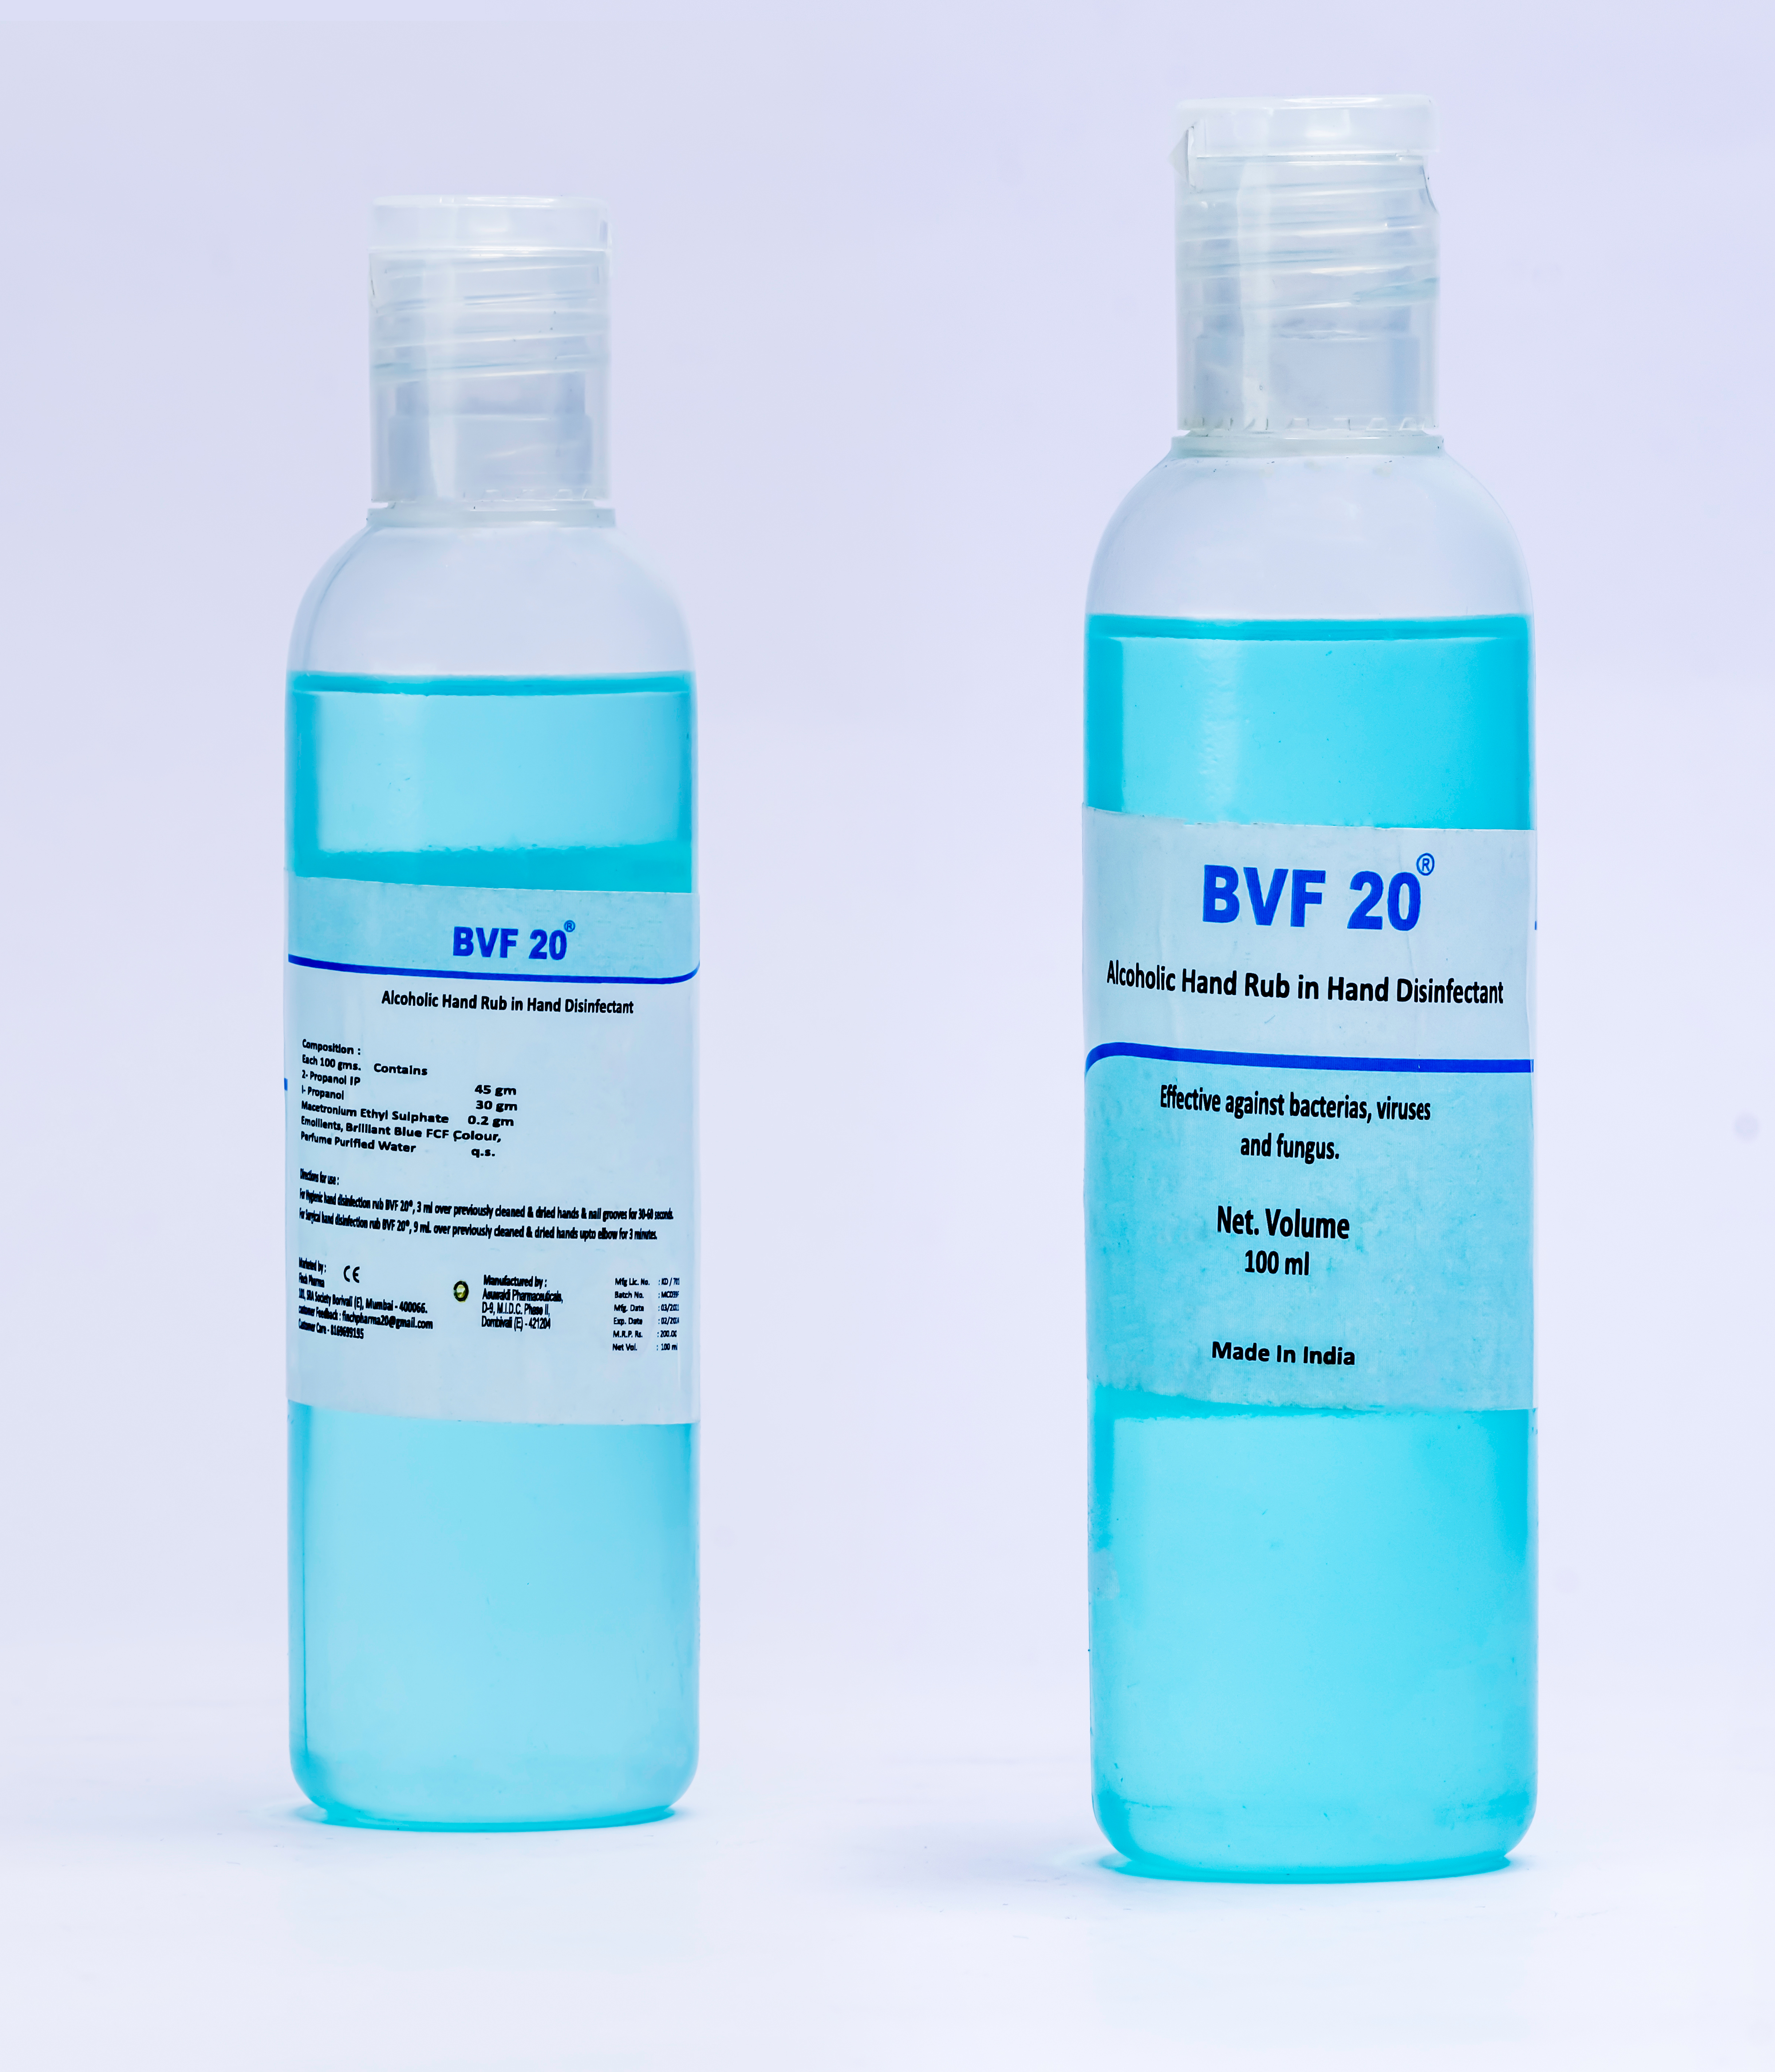 BVF 20 - Alcoholic Hand Rub in Hand Disinfectant